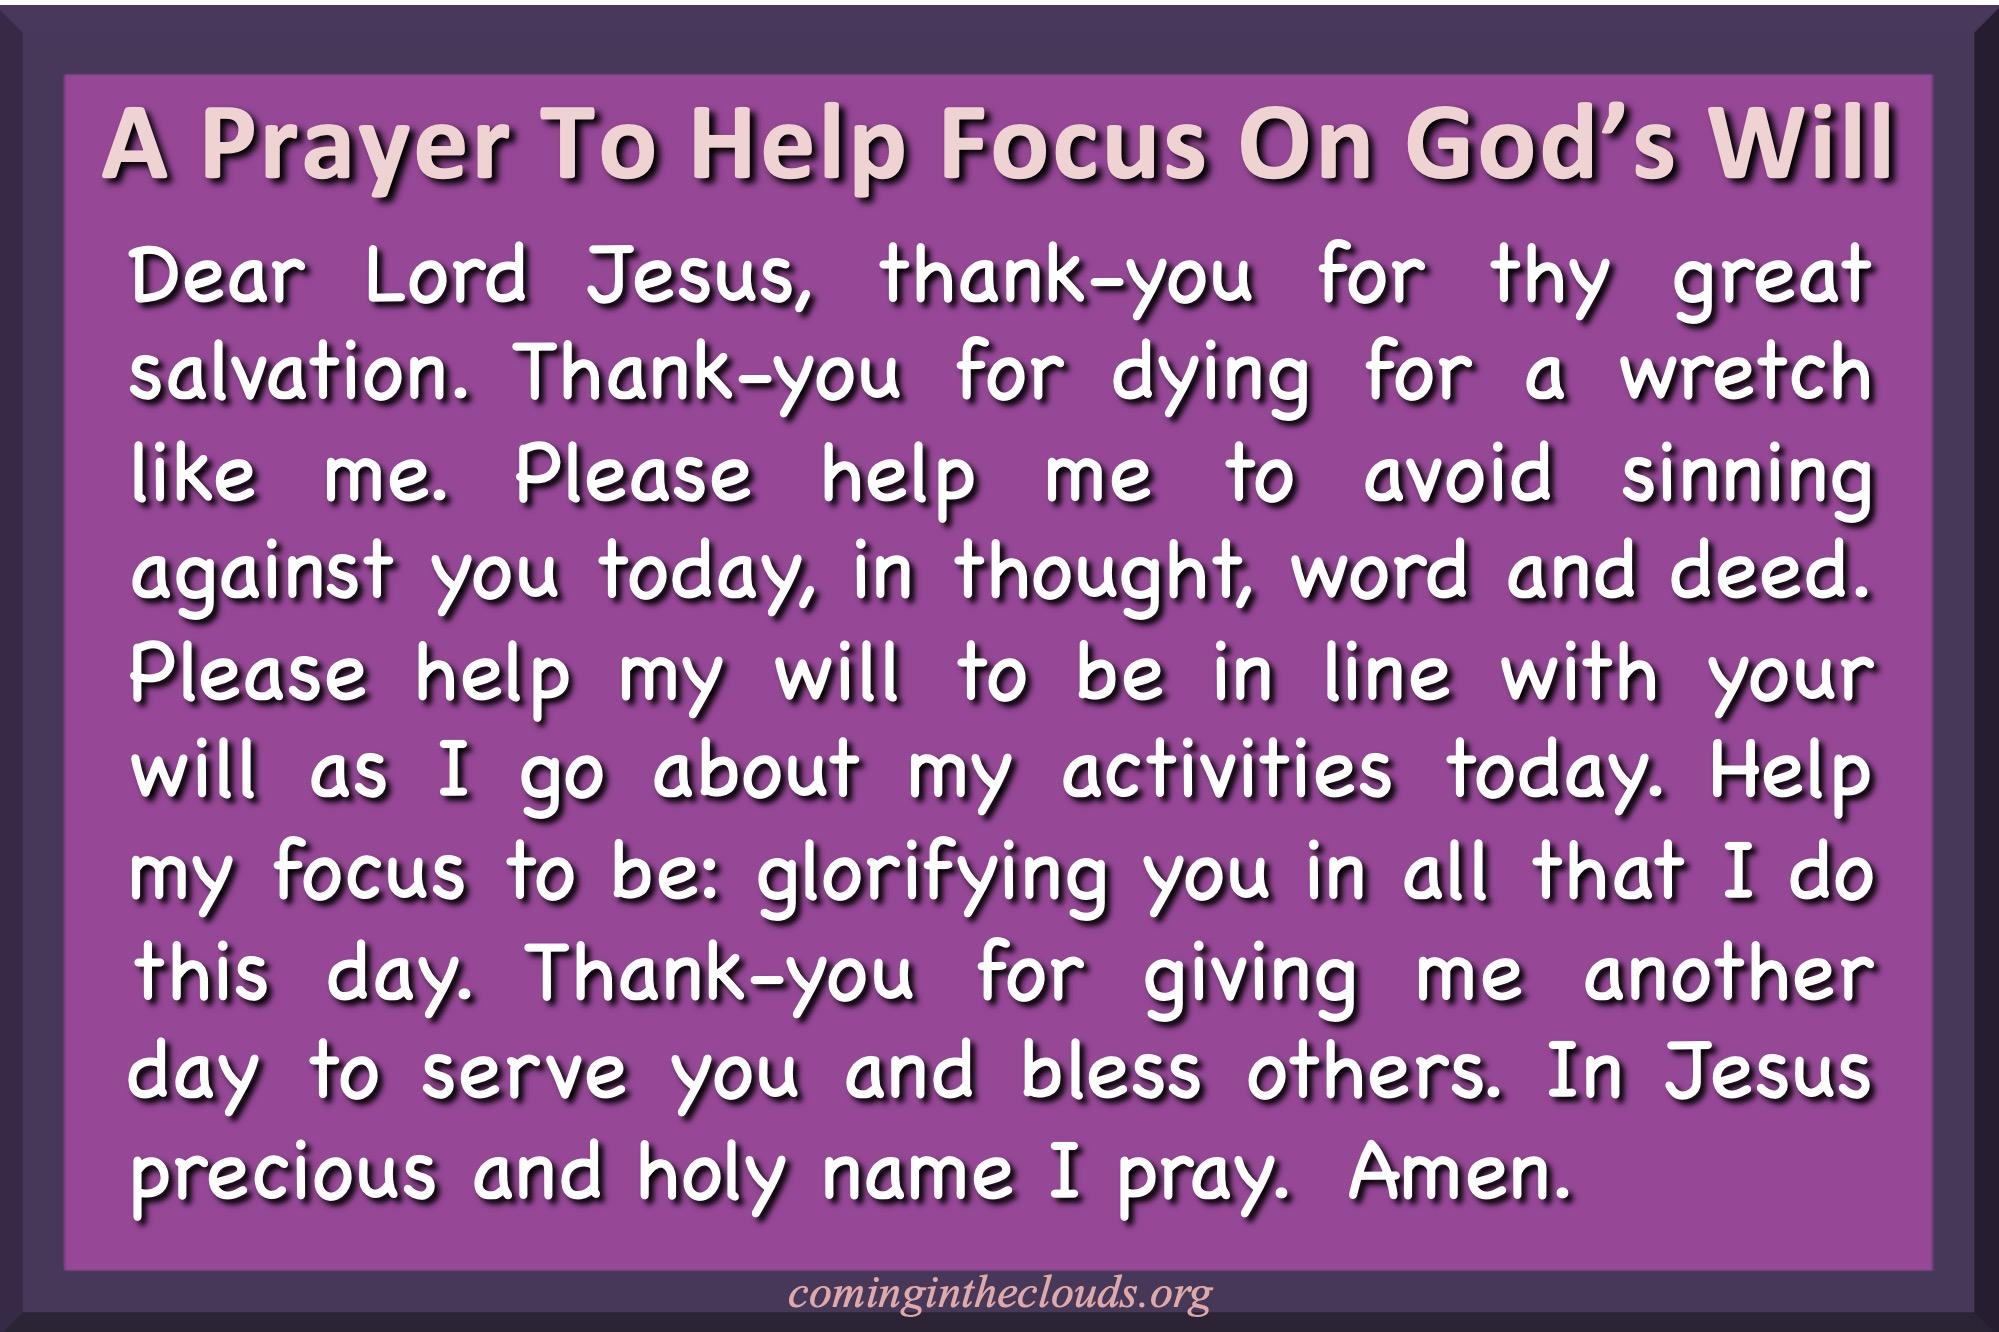 A prayer to help focus on Gods will